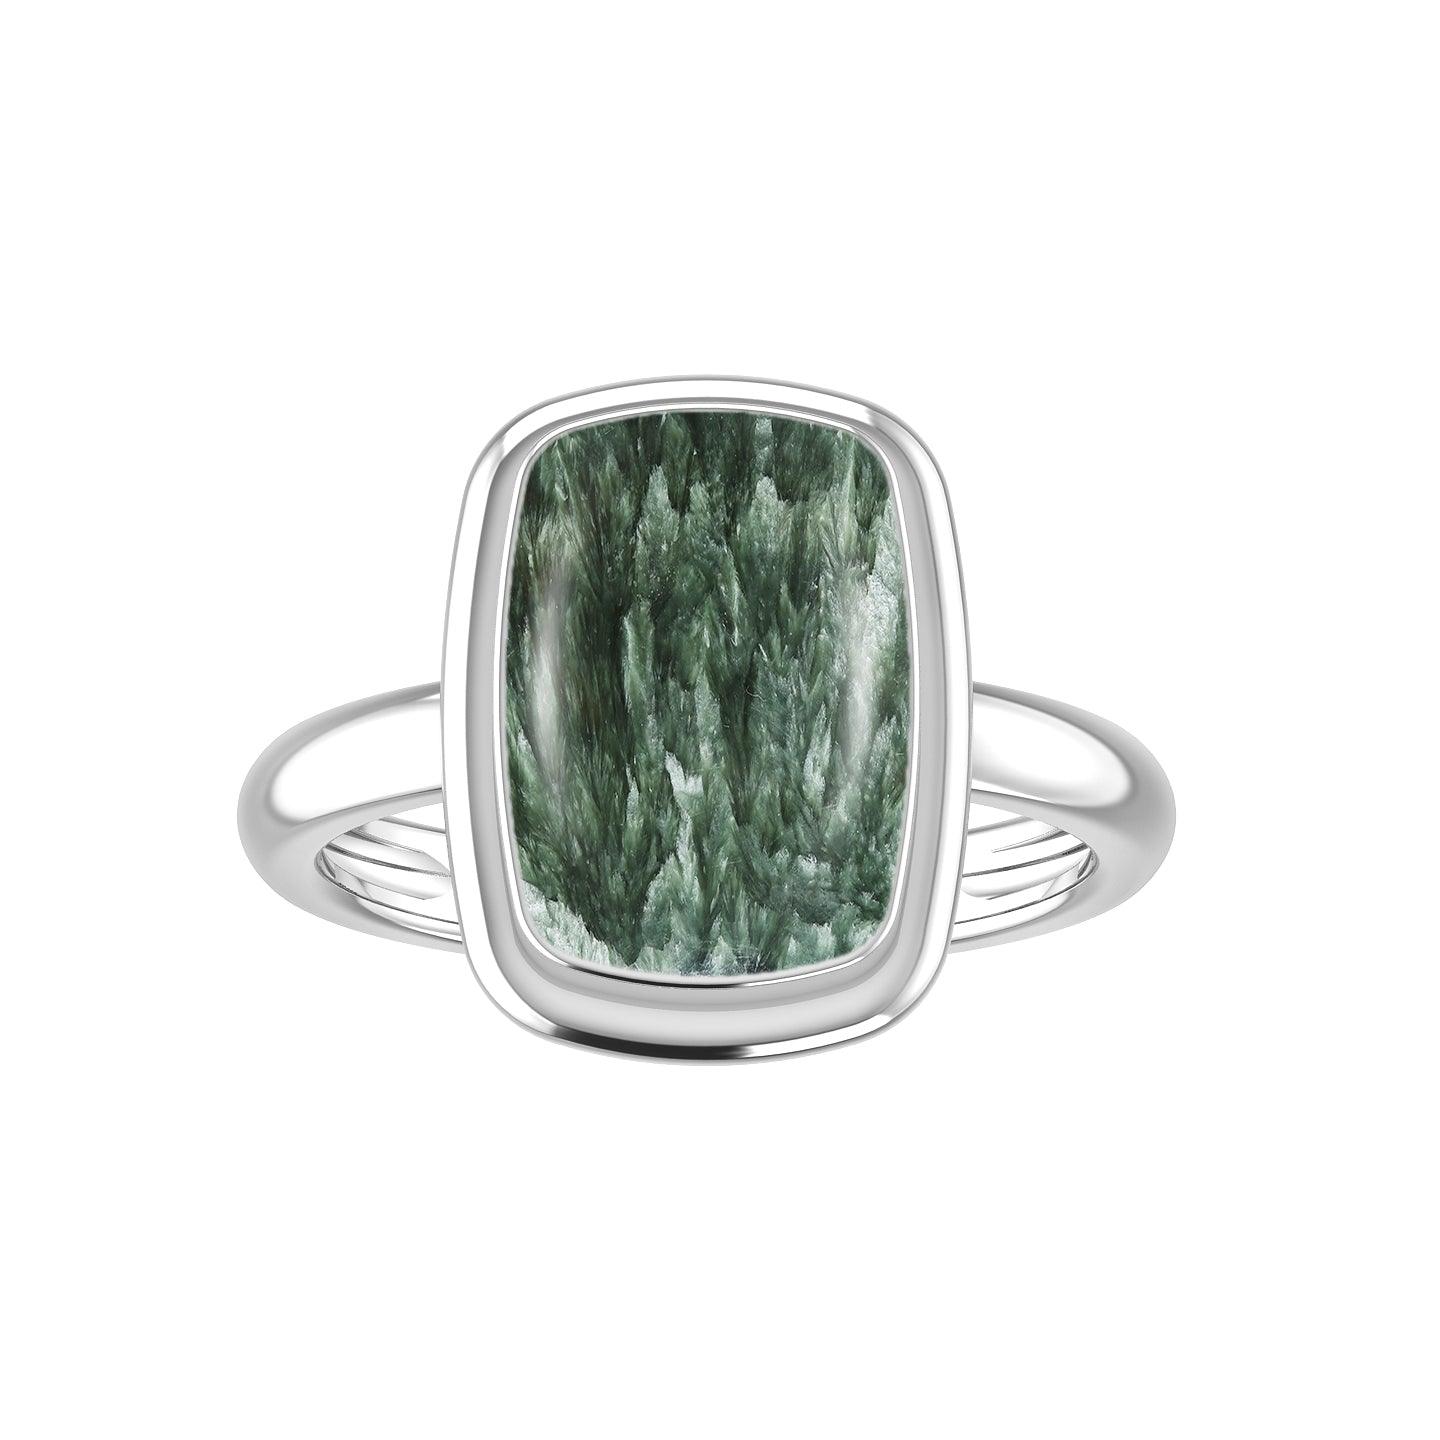 Natural Seraphinite Ring 925 Sterling Silver Ring Handmade Silver Ring Jewelry Pack of 6 - (Box 3)